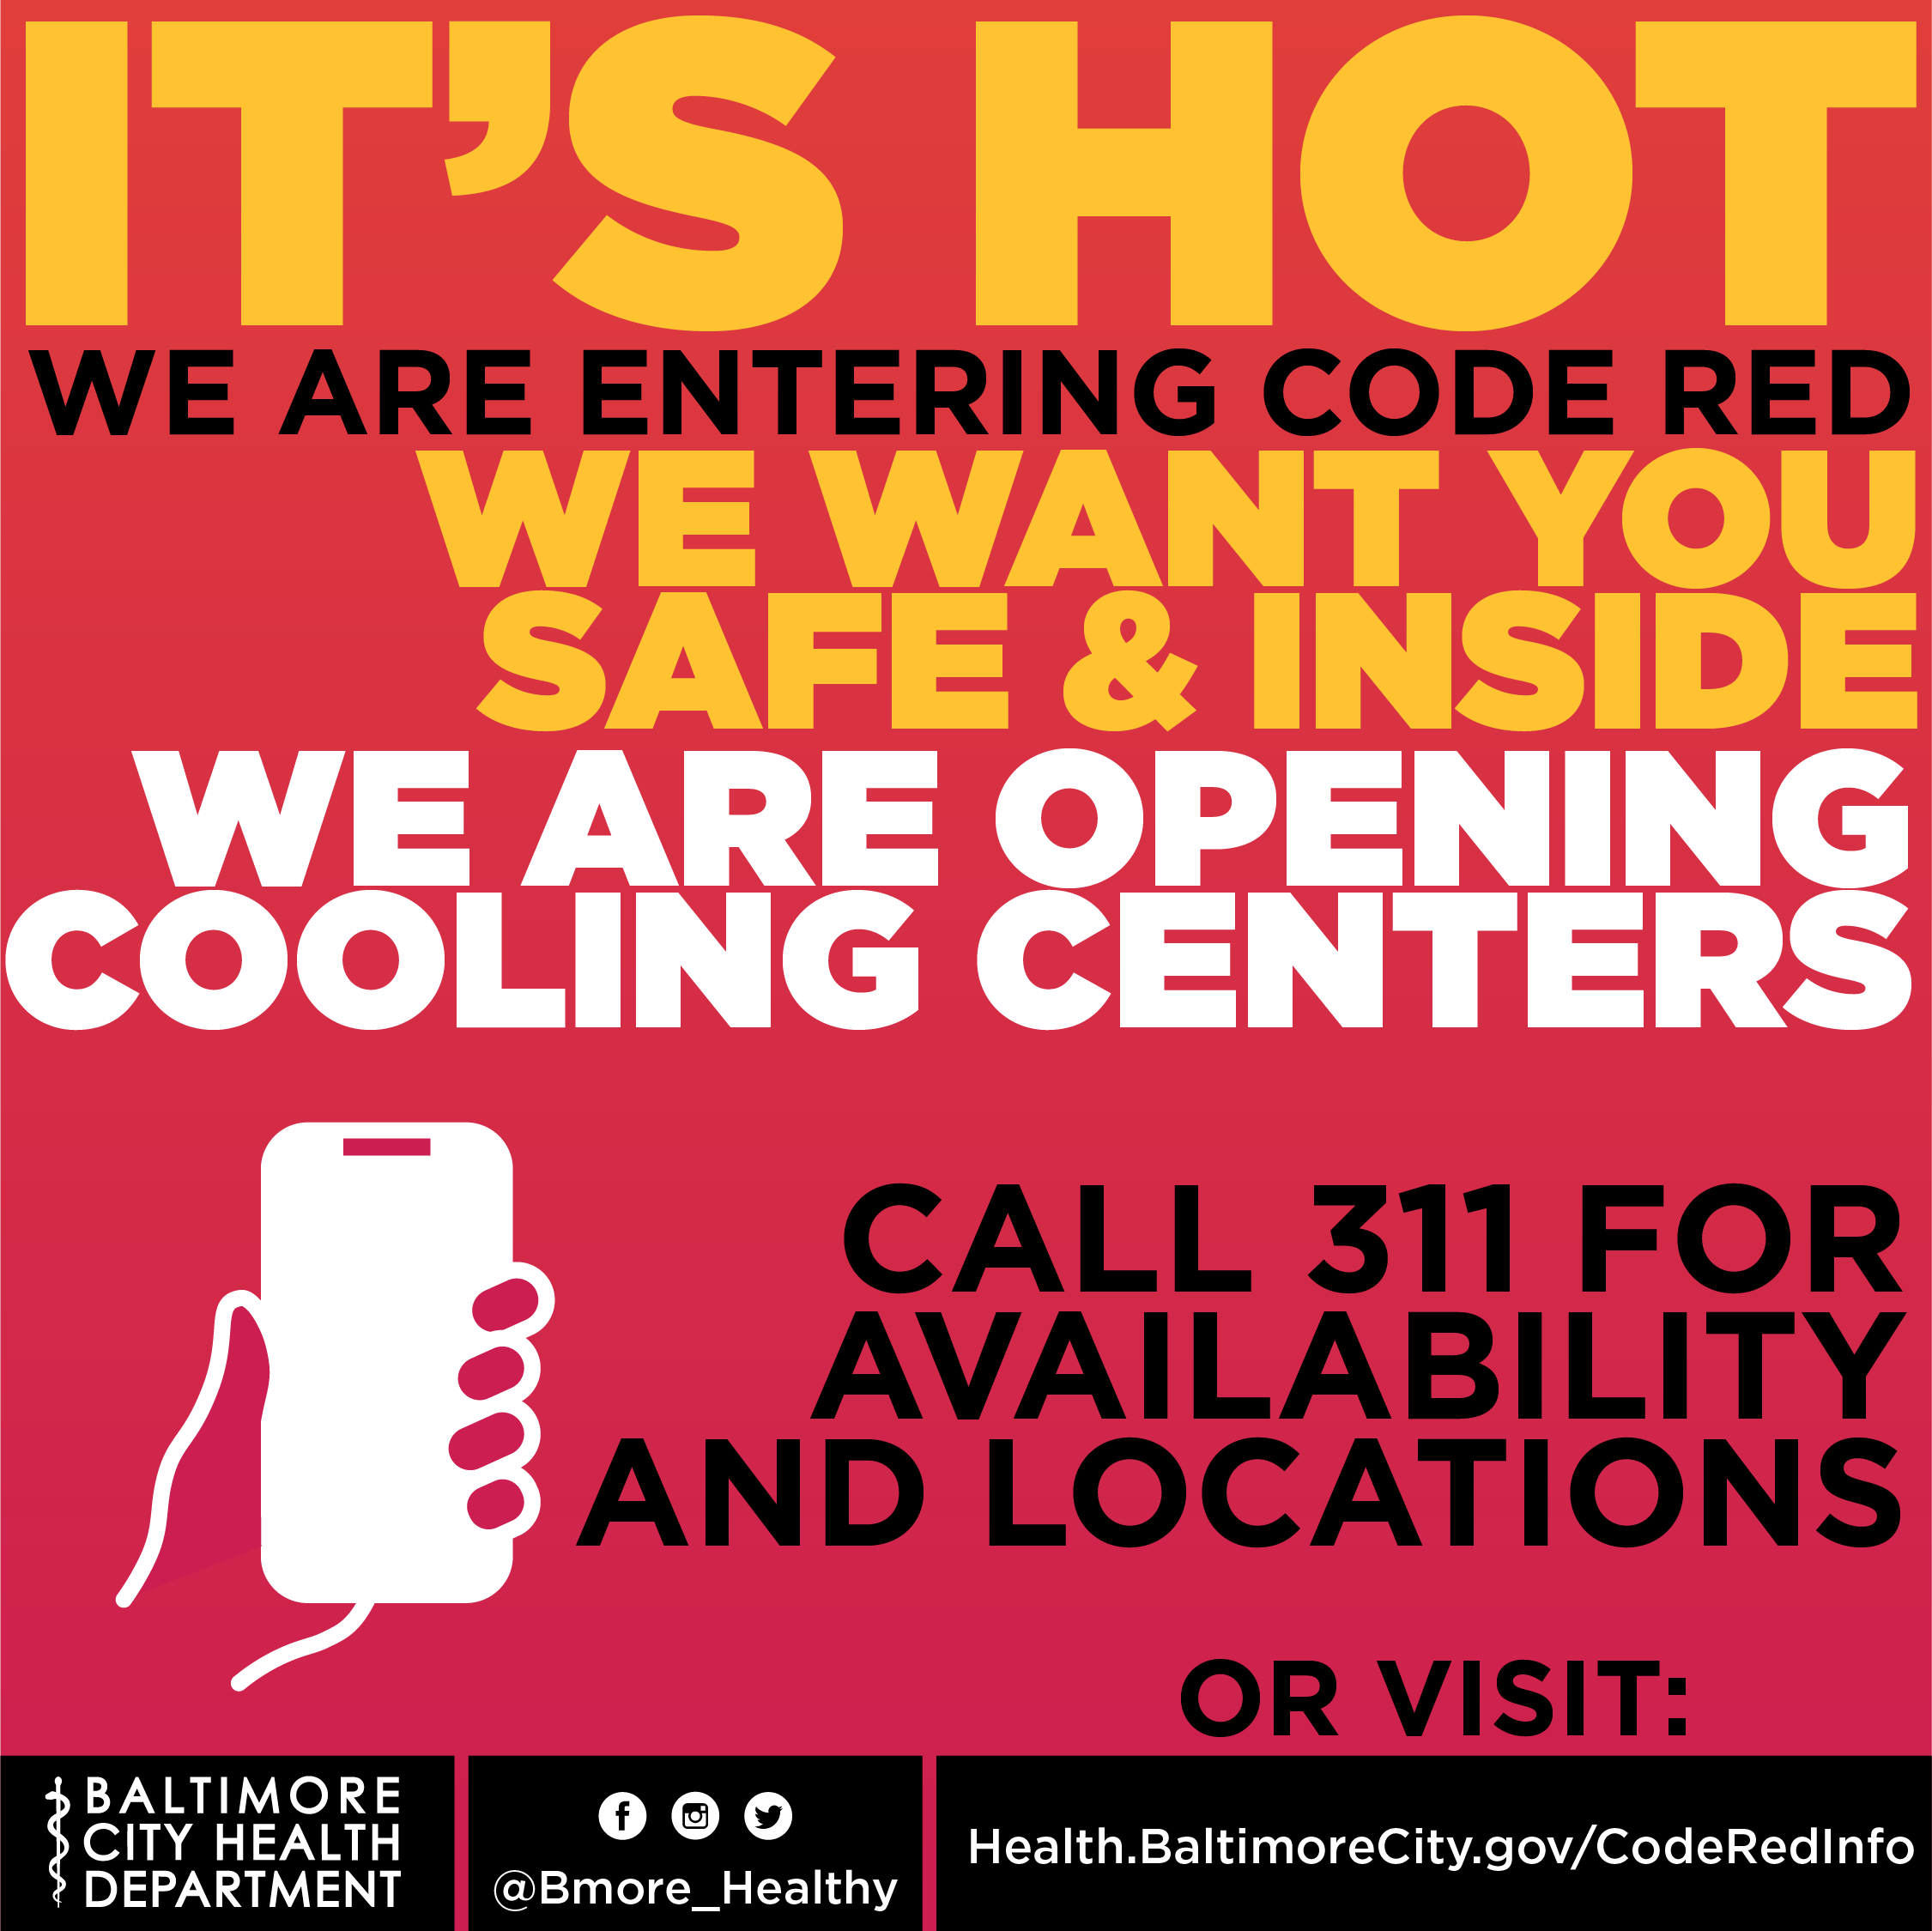 Its Hot! We are entering Code Red, and we want you safe and inside. Cooling Centers are opening, call 311 for availability and locations. 